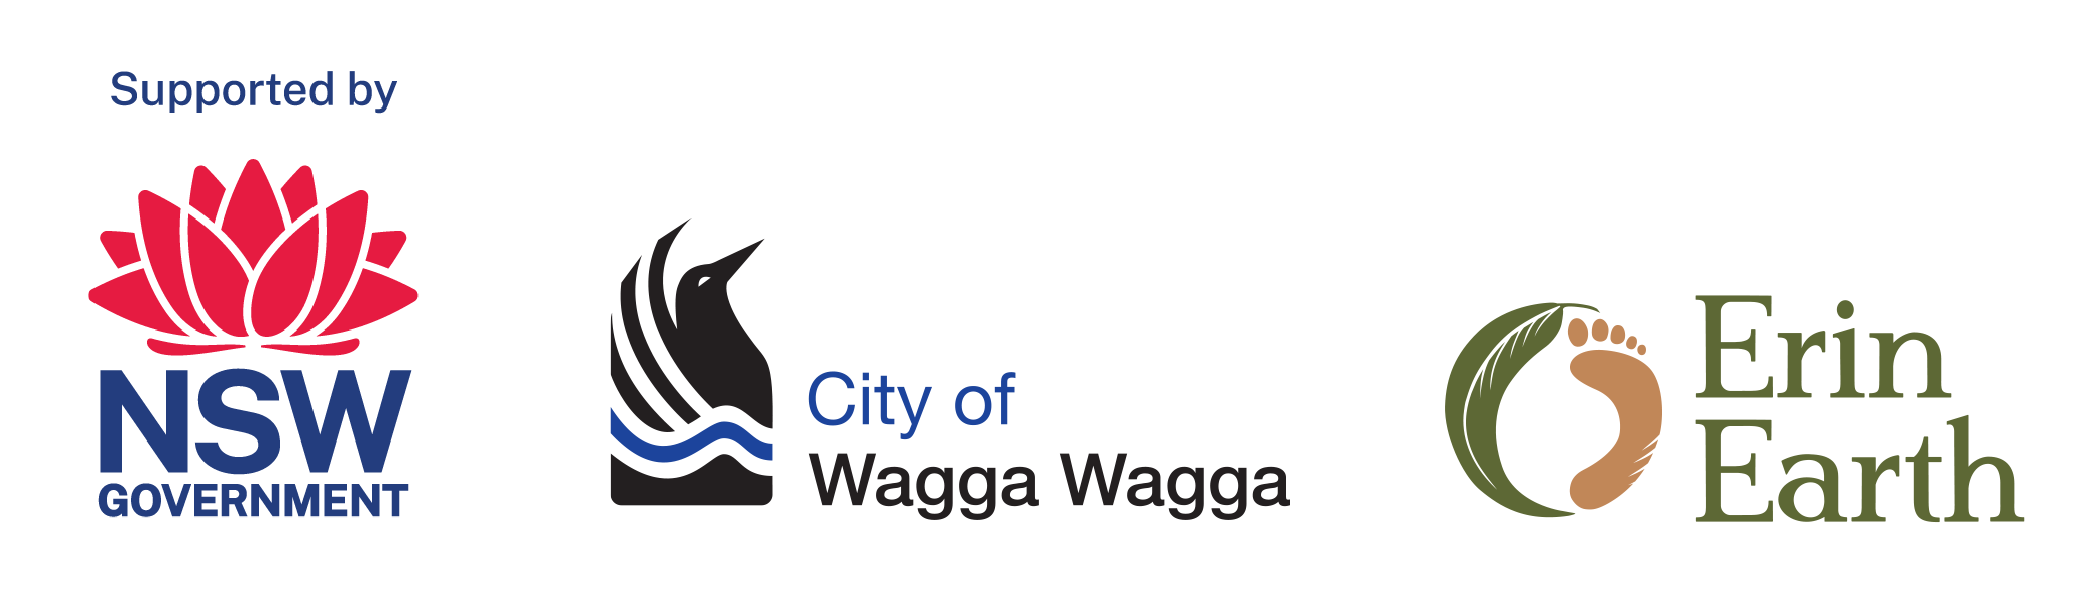 image of corporate logos for Regional Growth NSW Development Corporation, Wagga Wagga City Council and ErinEarth